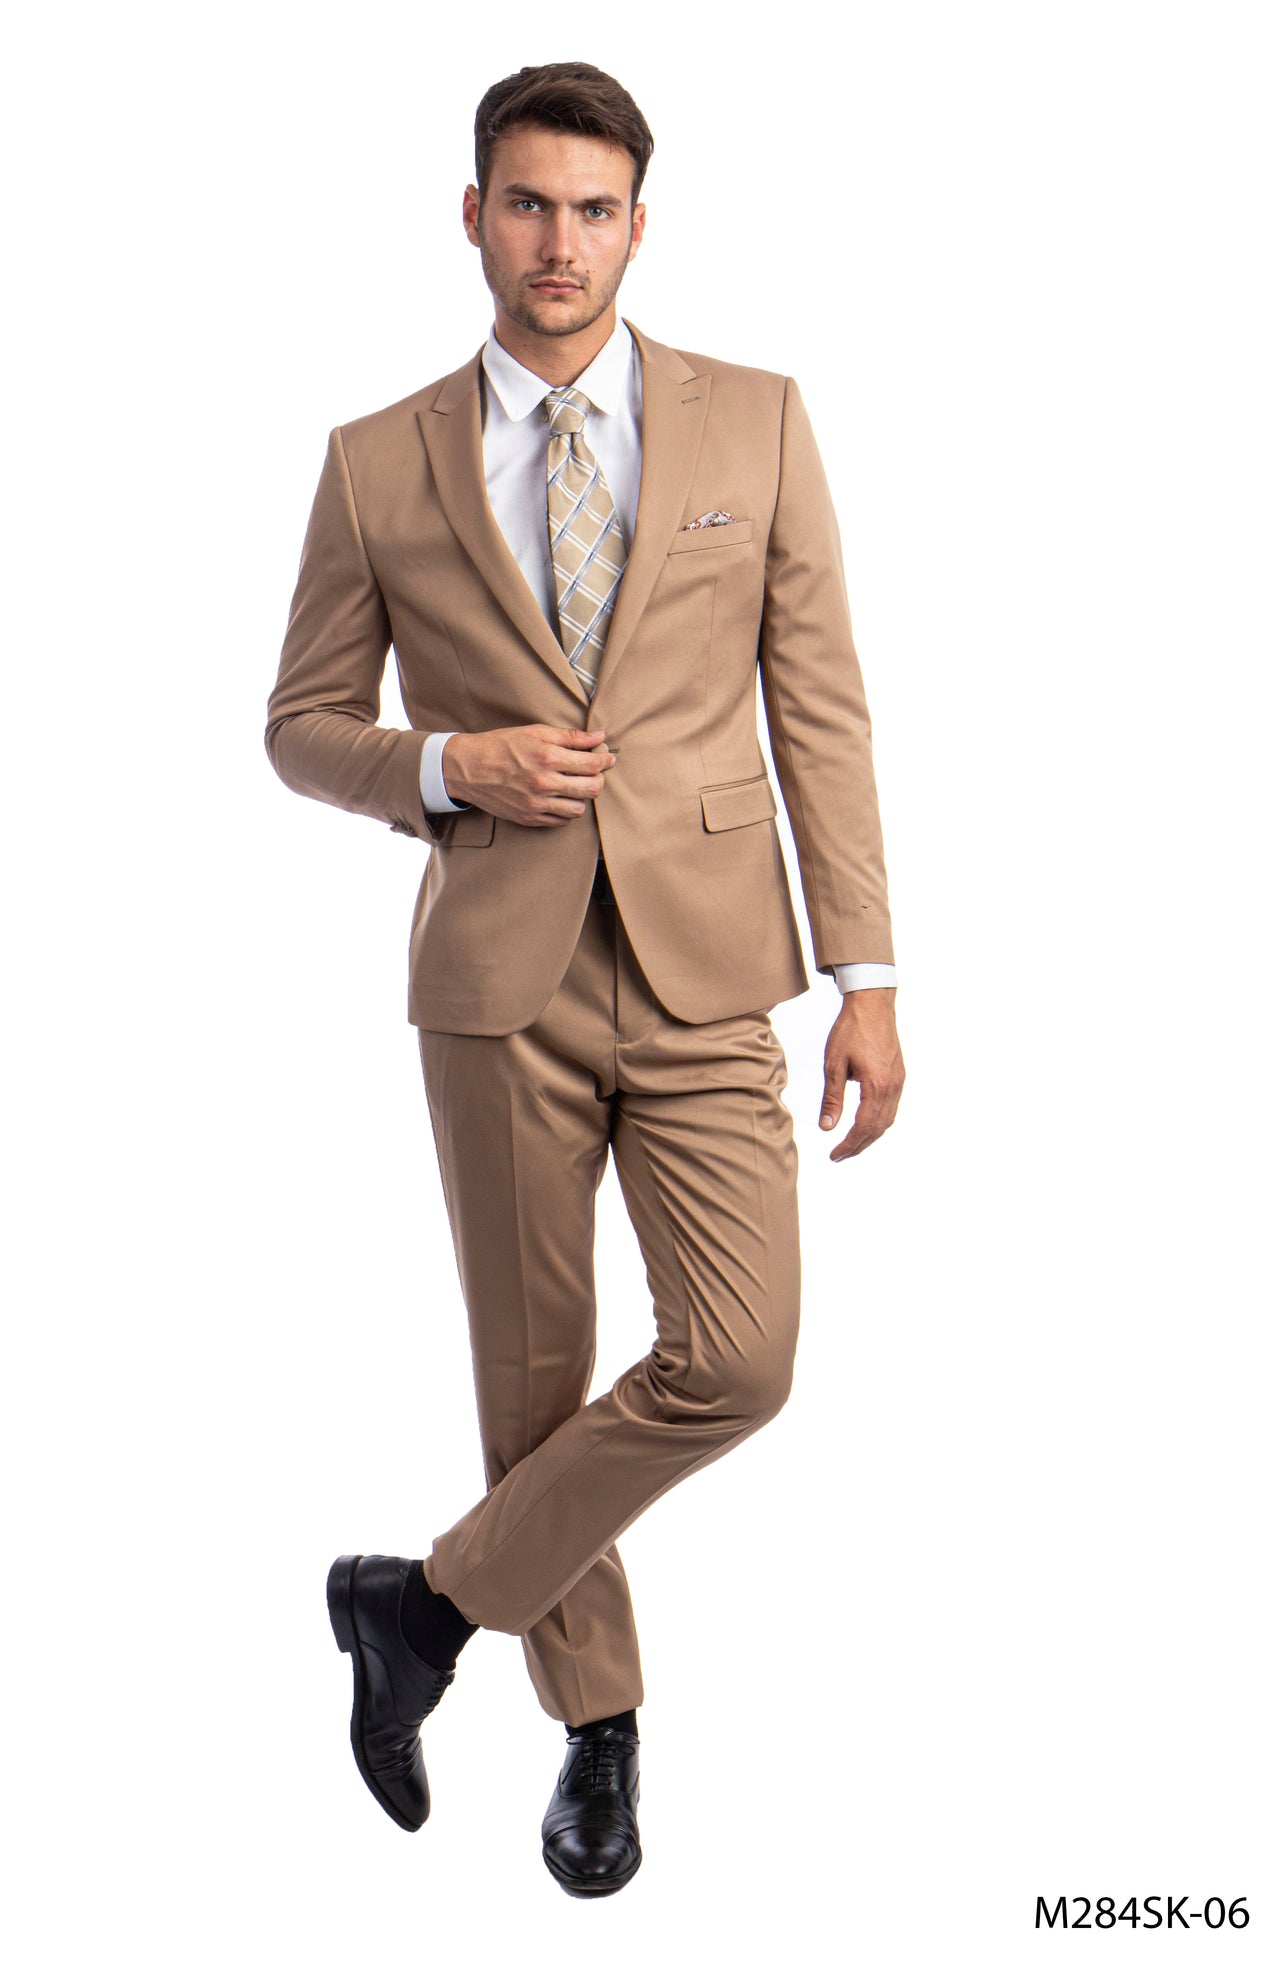 Dk.Taupe Suit For Men Formal Suits For All Ocassions - Hattitude